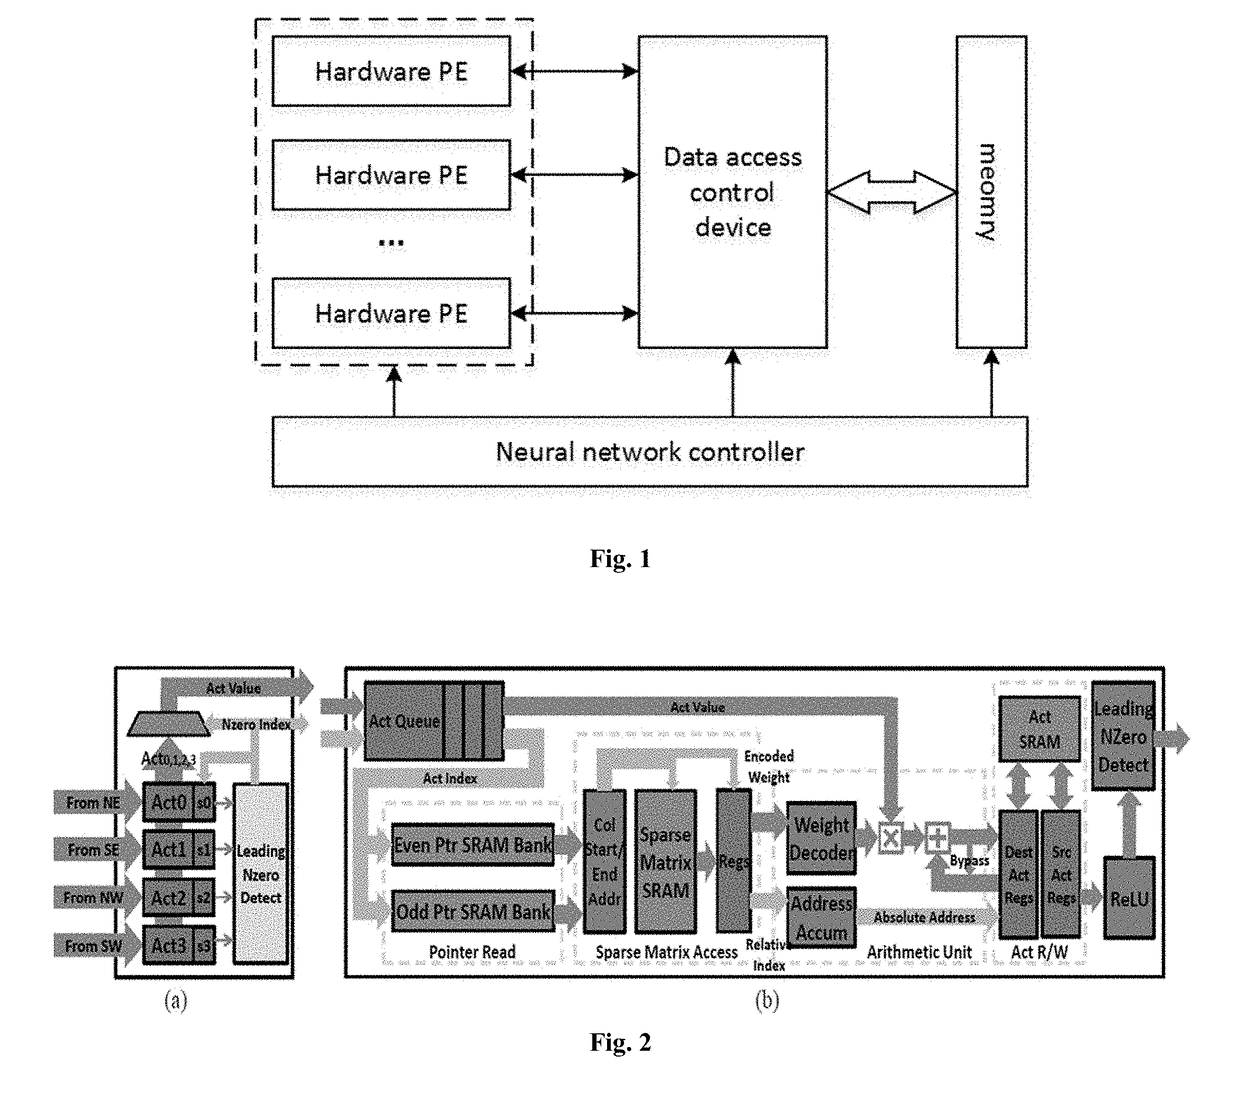 Efficient Data Access Control Device for Neural Network Hardware Acceleration System